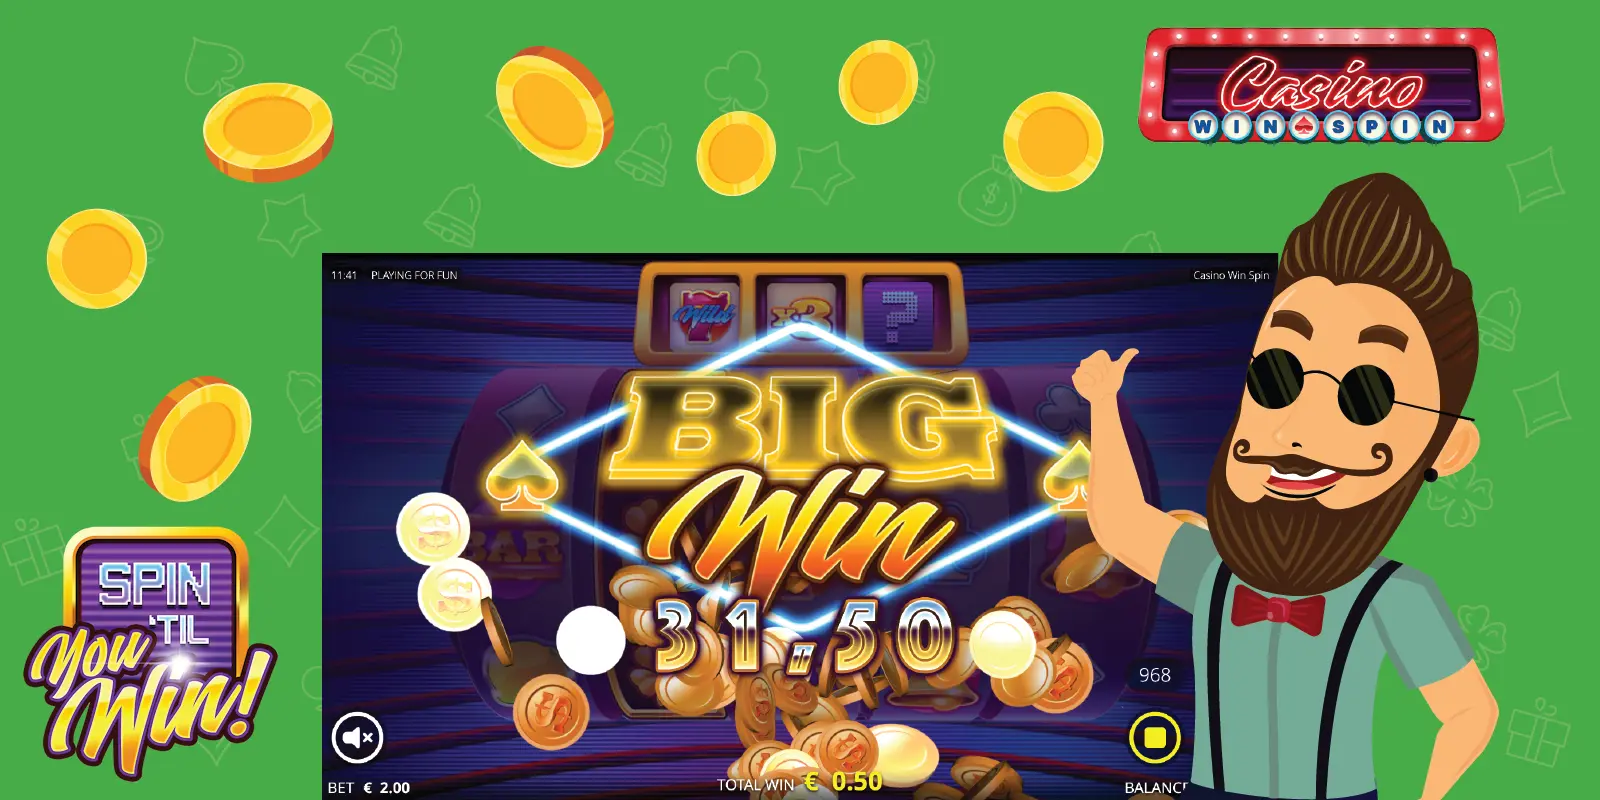 How to Win Casino Win Spin Slot